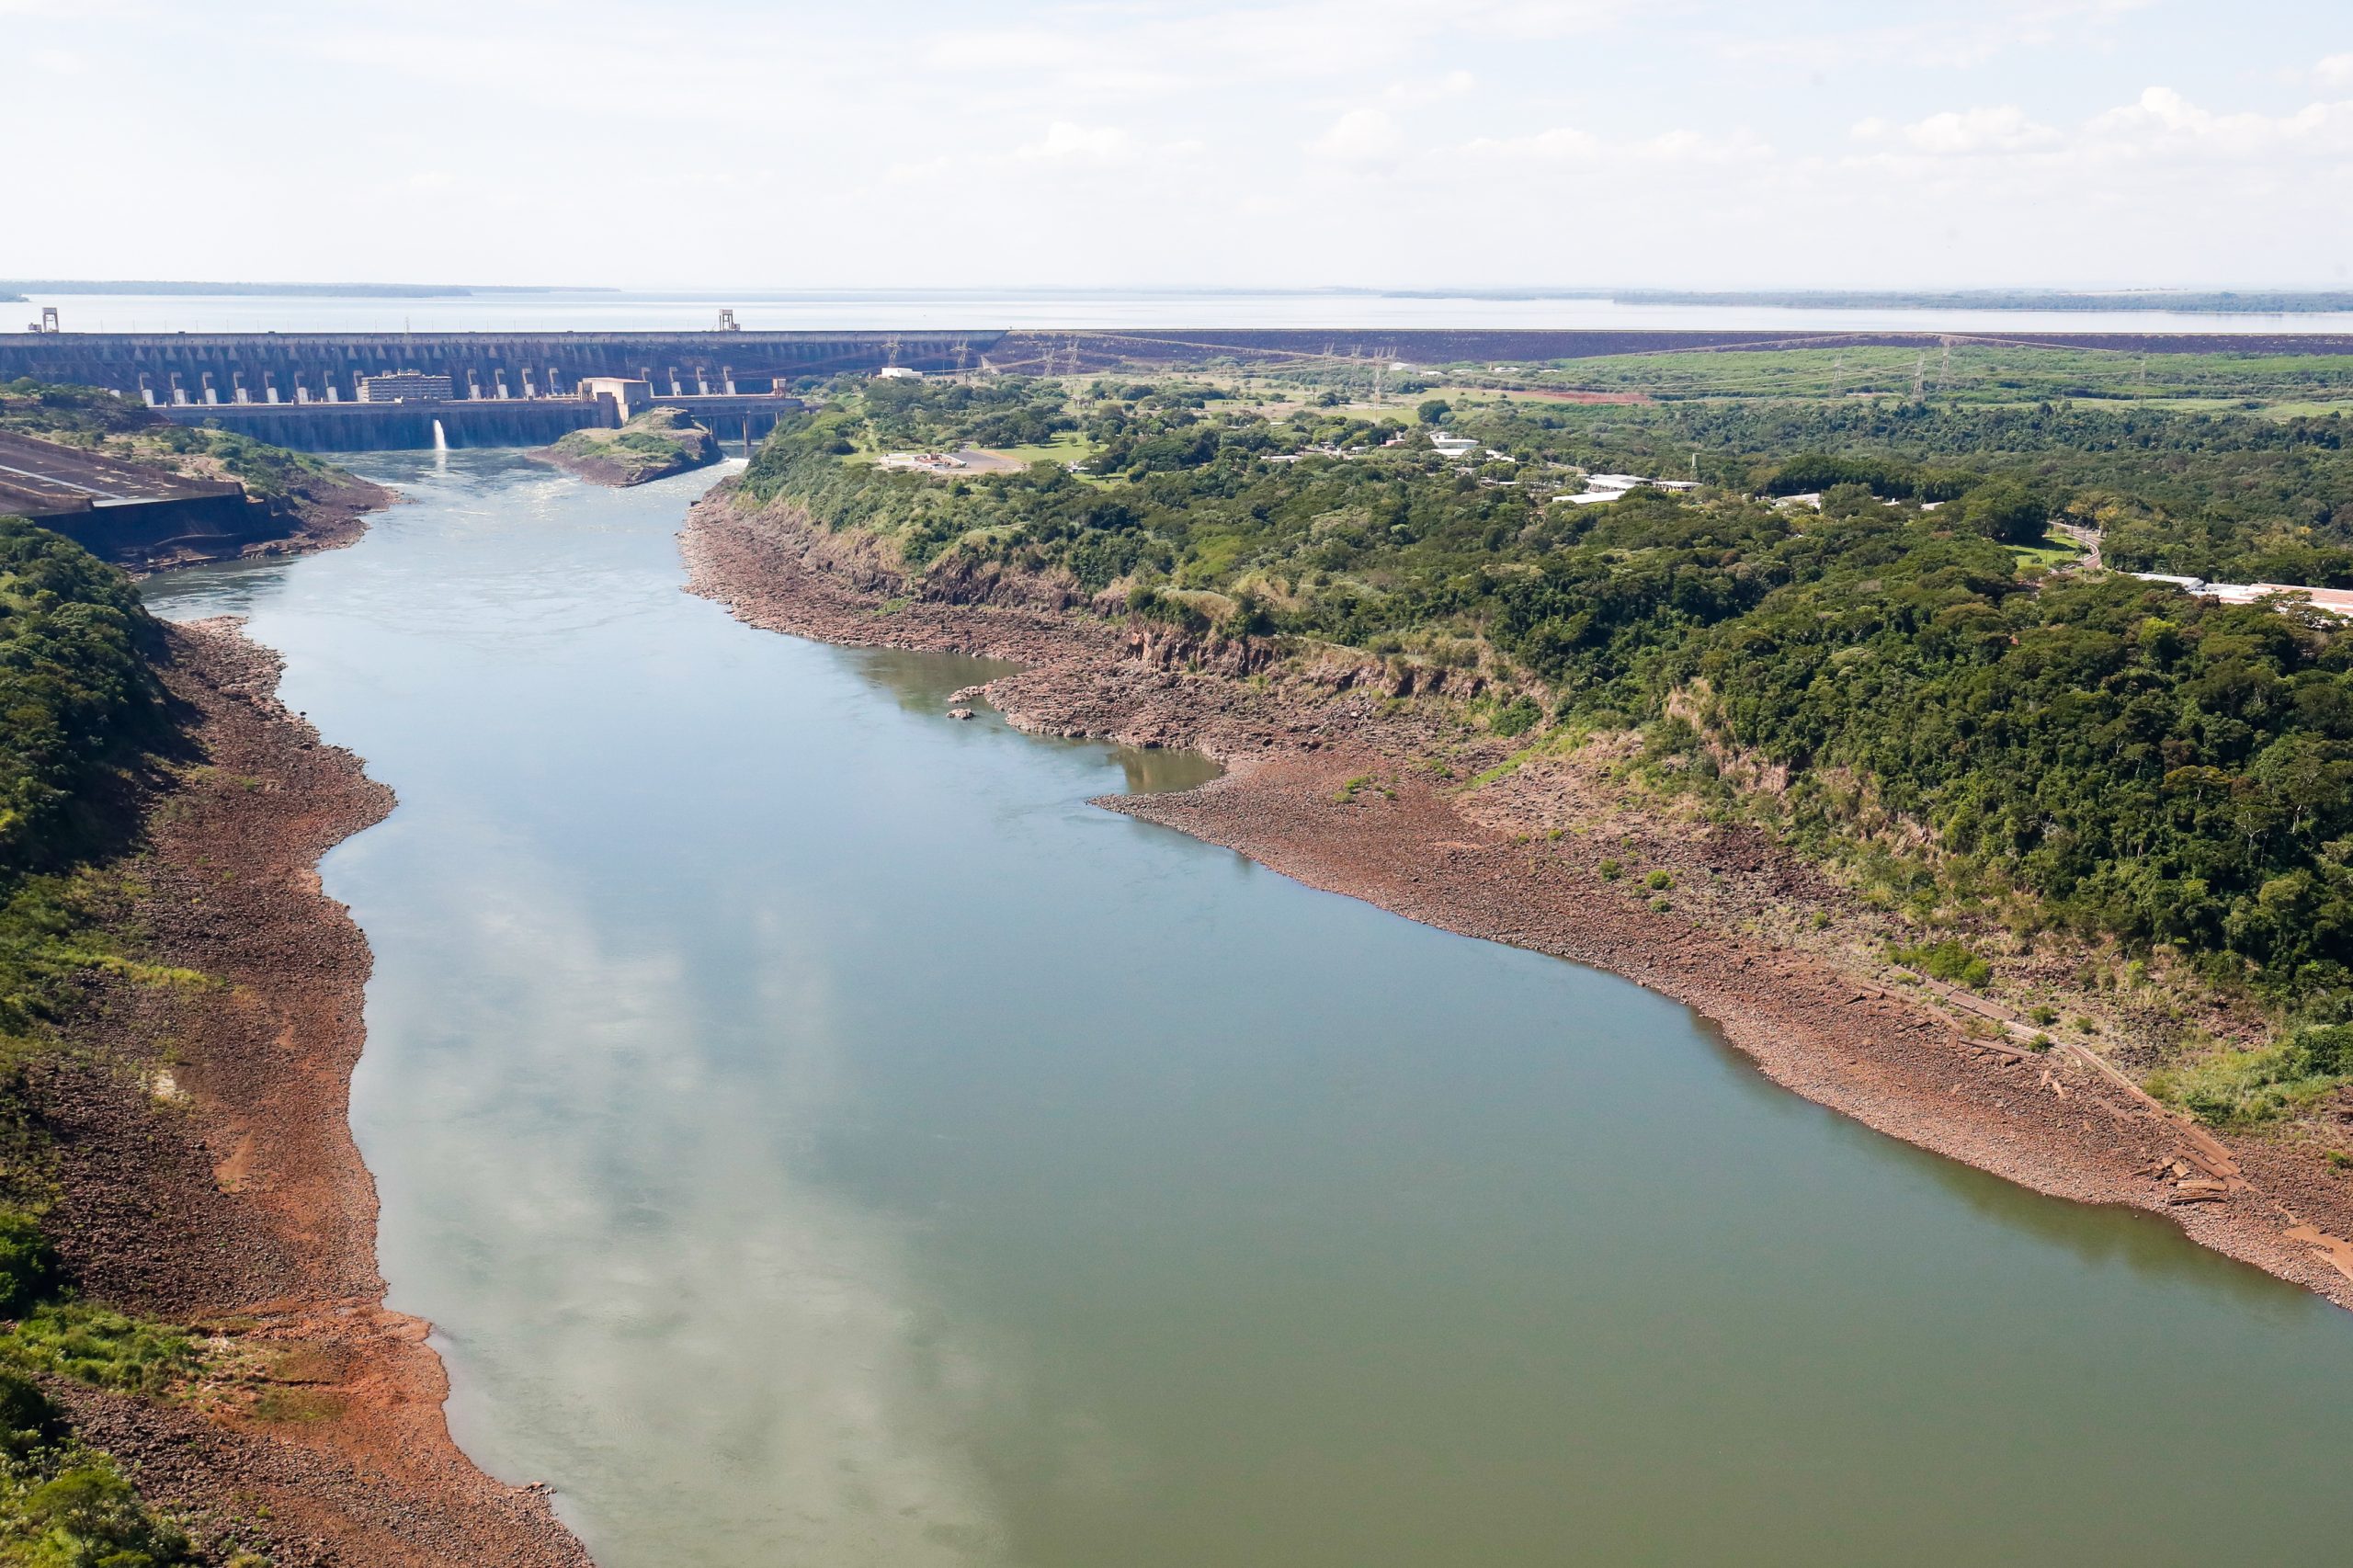 The Itaipu dam on the Paraná River between Brazil and Paraguay